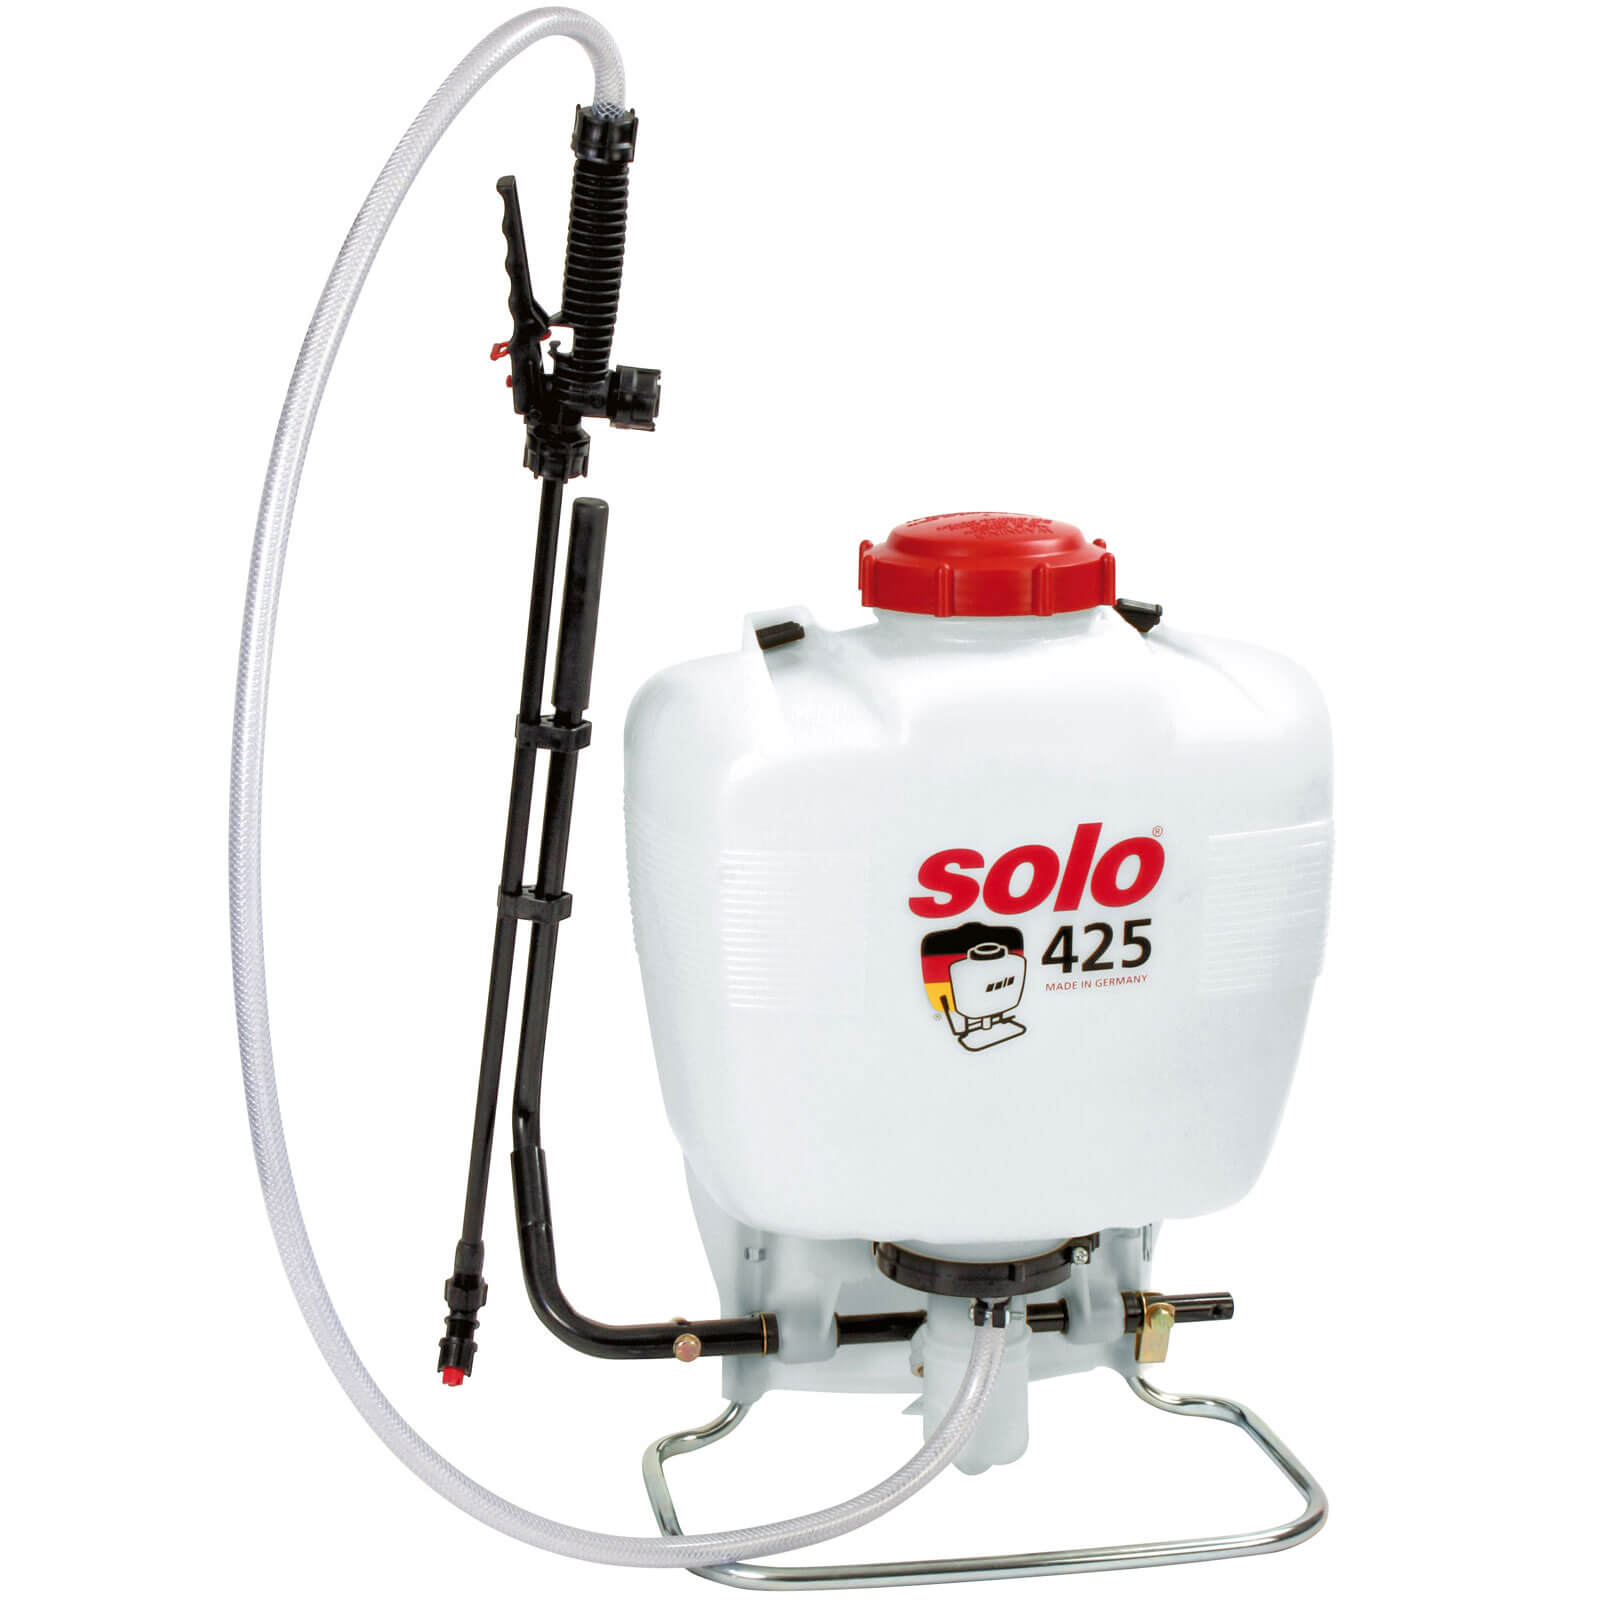 Image of Solo 425 PRO Backpack Chemical and Water Pressure Sprayer 15l